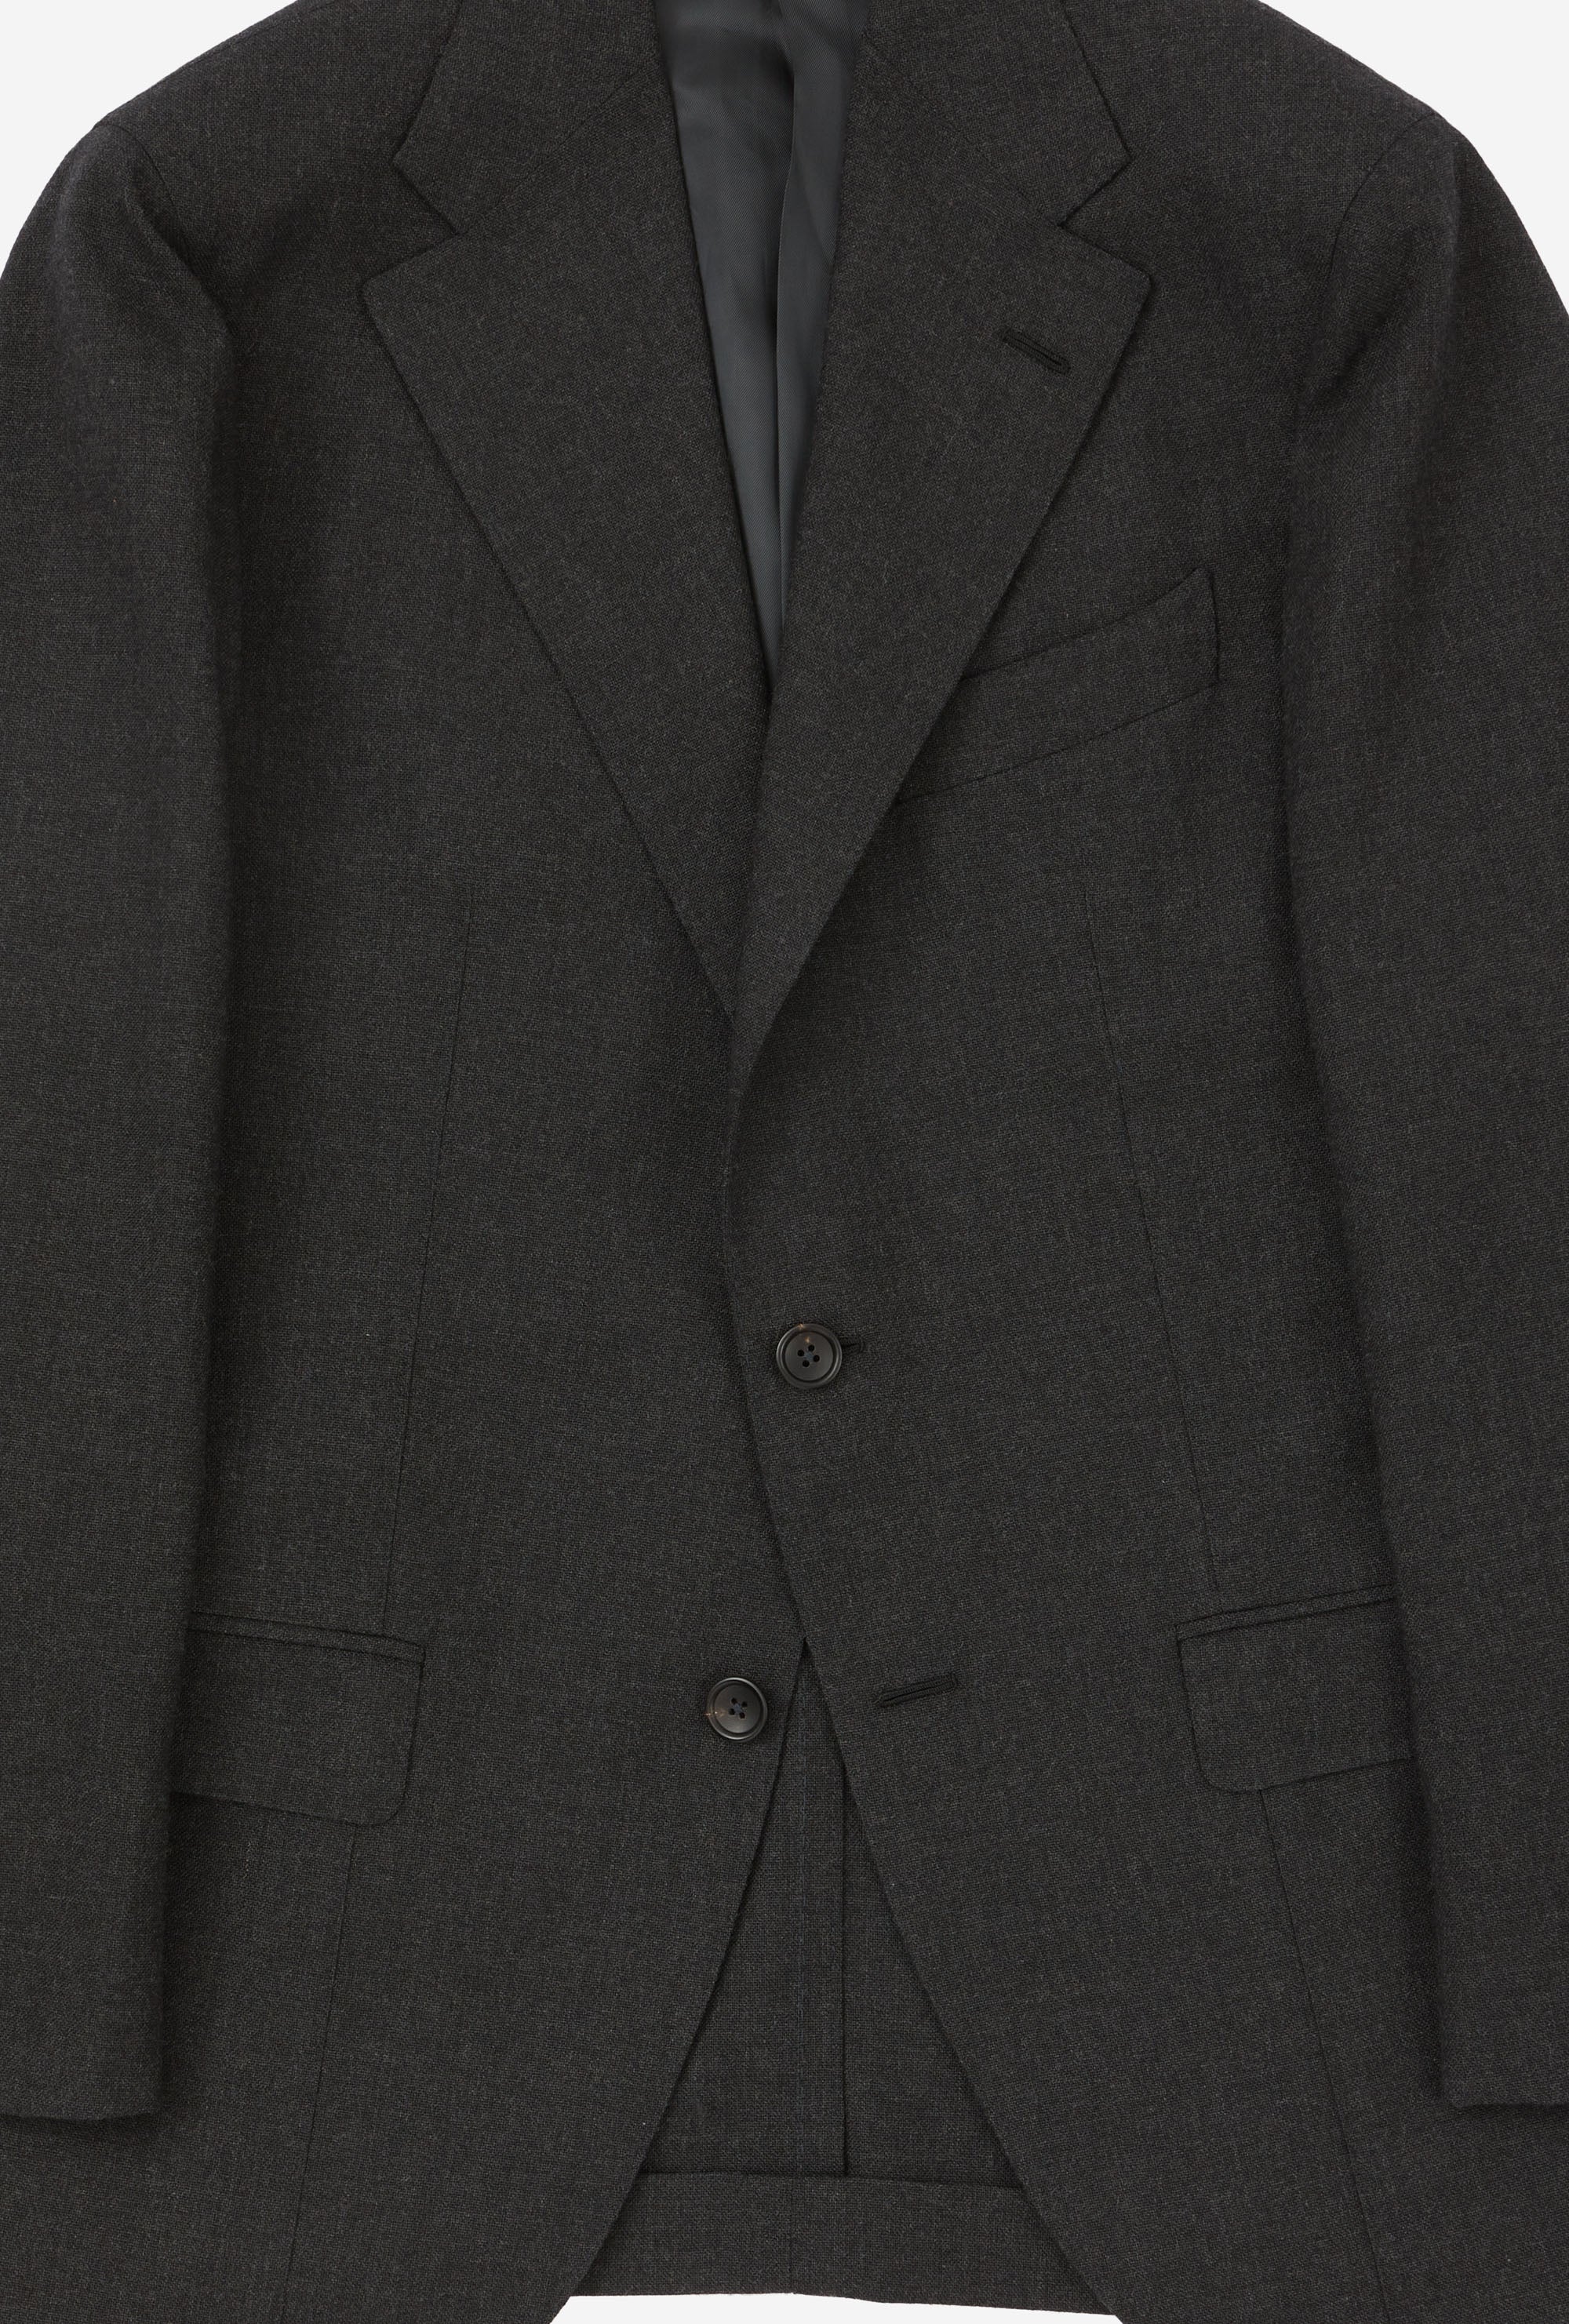 Suit Single Breasted Charcoal High-Twist Wool